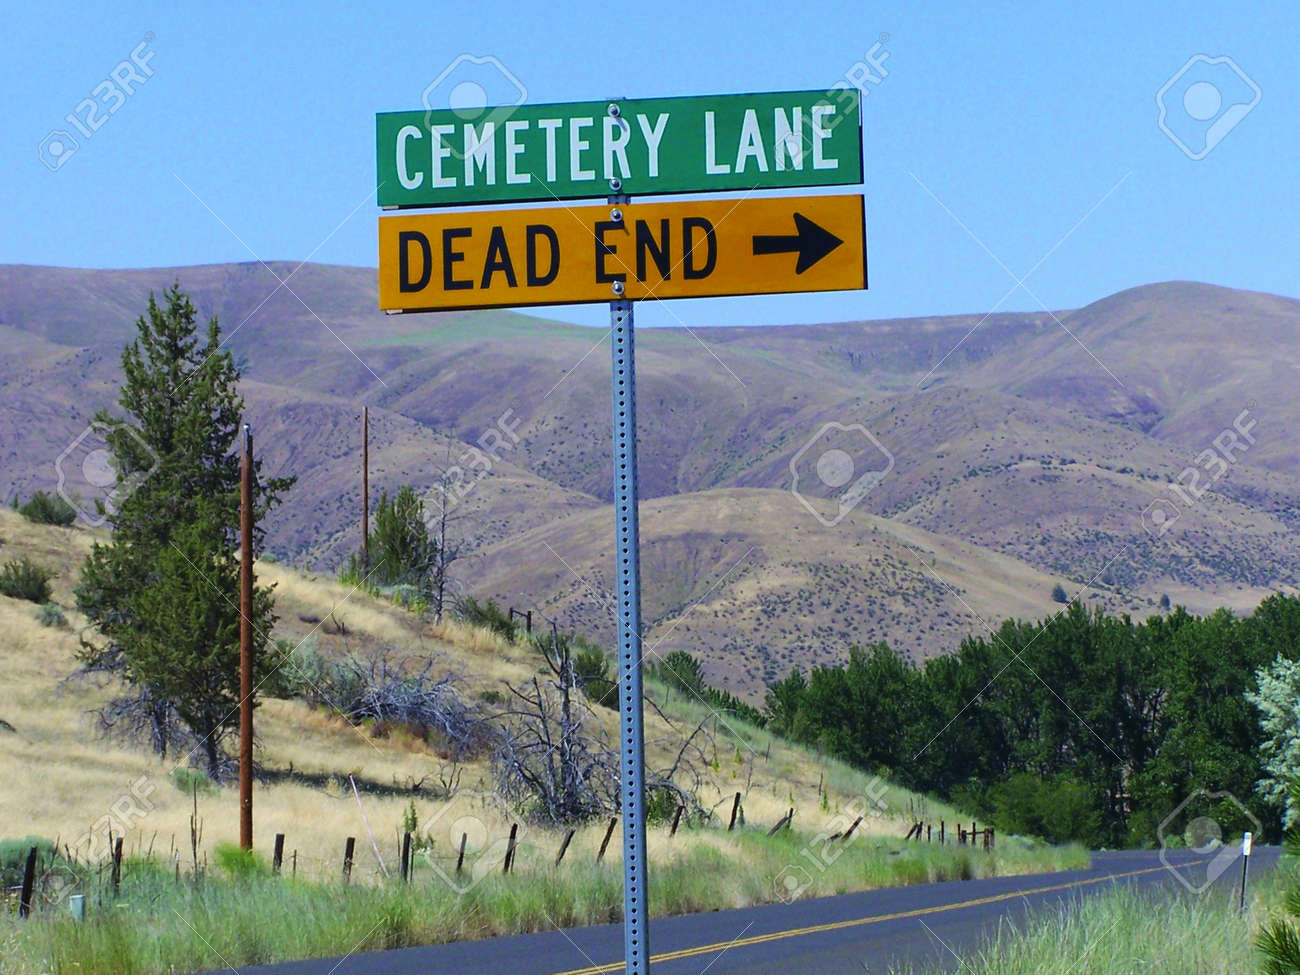 14631653-Cemetery-Road-Dead-End-Sign-Stock-Photo.jpg